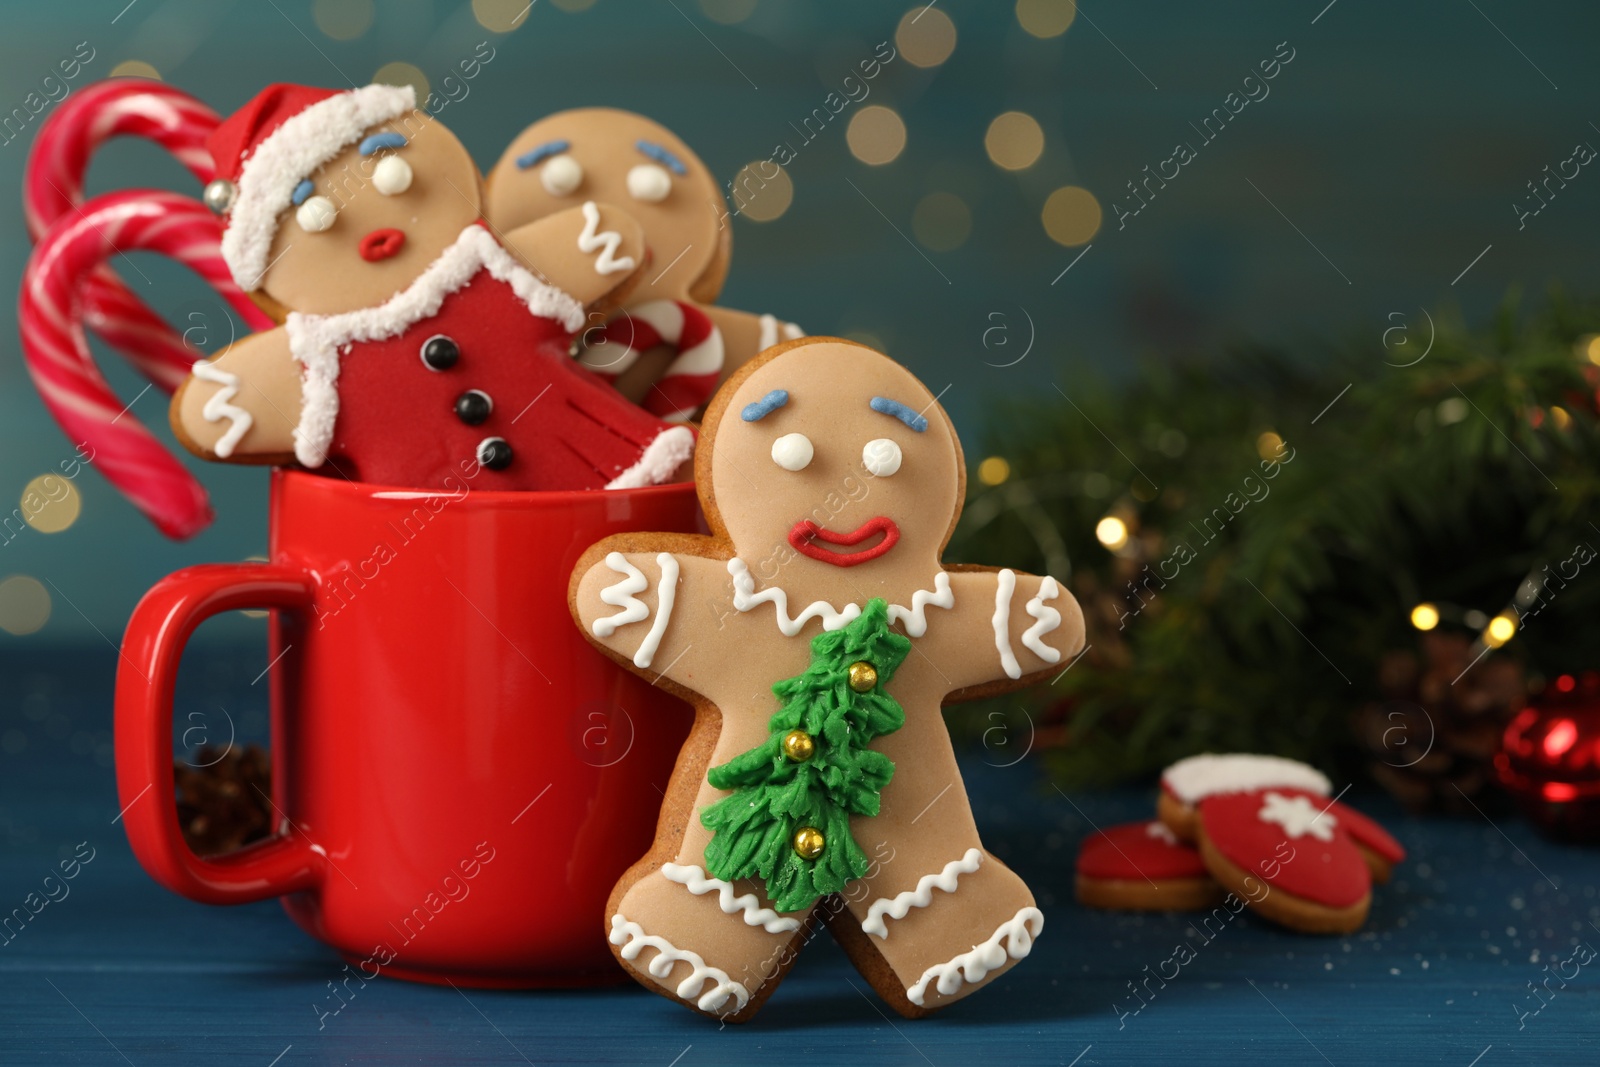 Photo of Delicious homemade Christmas cookies with cup on blue wooden table against blurred festive lights